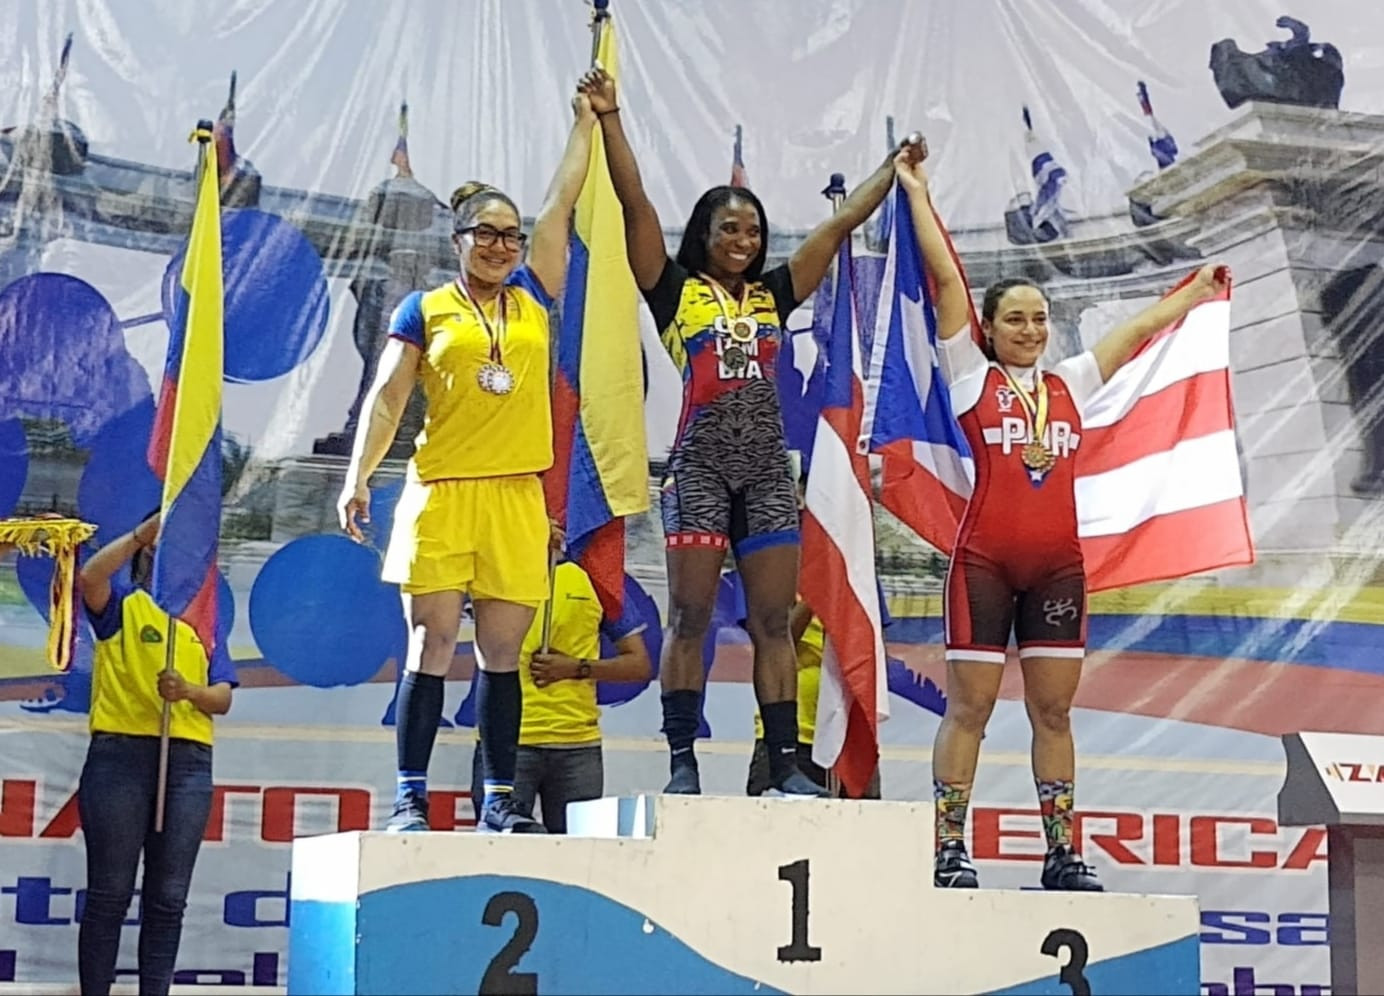 The podium for the women's 59kg category at the Pan American Championships in Guayaquil ©PAWF 